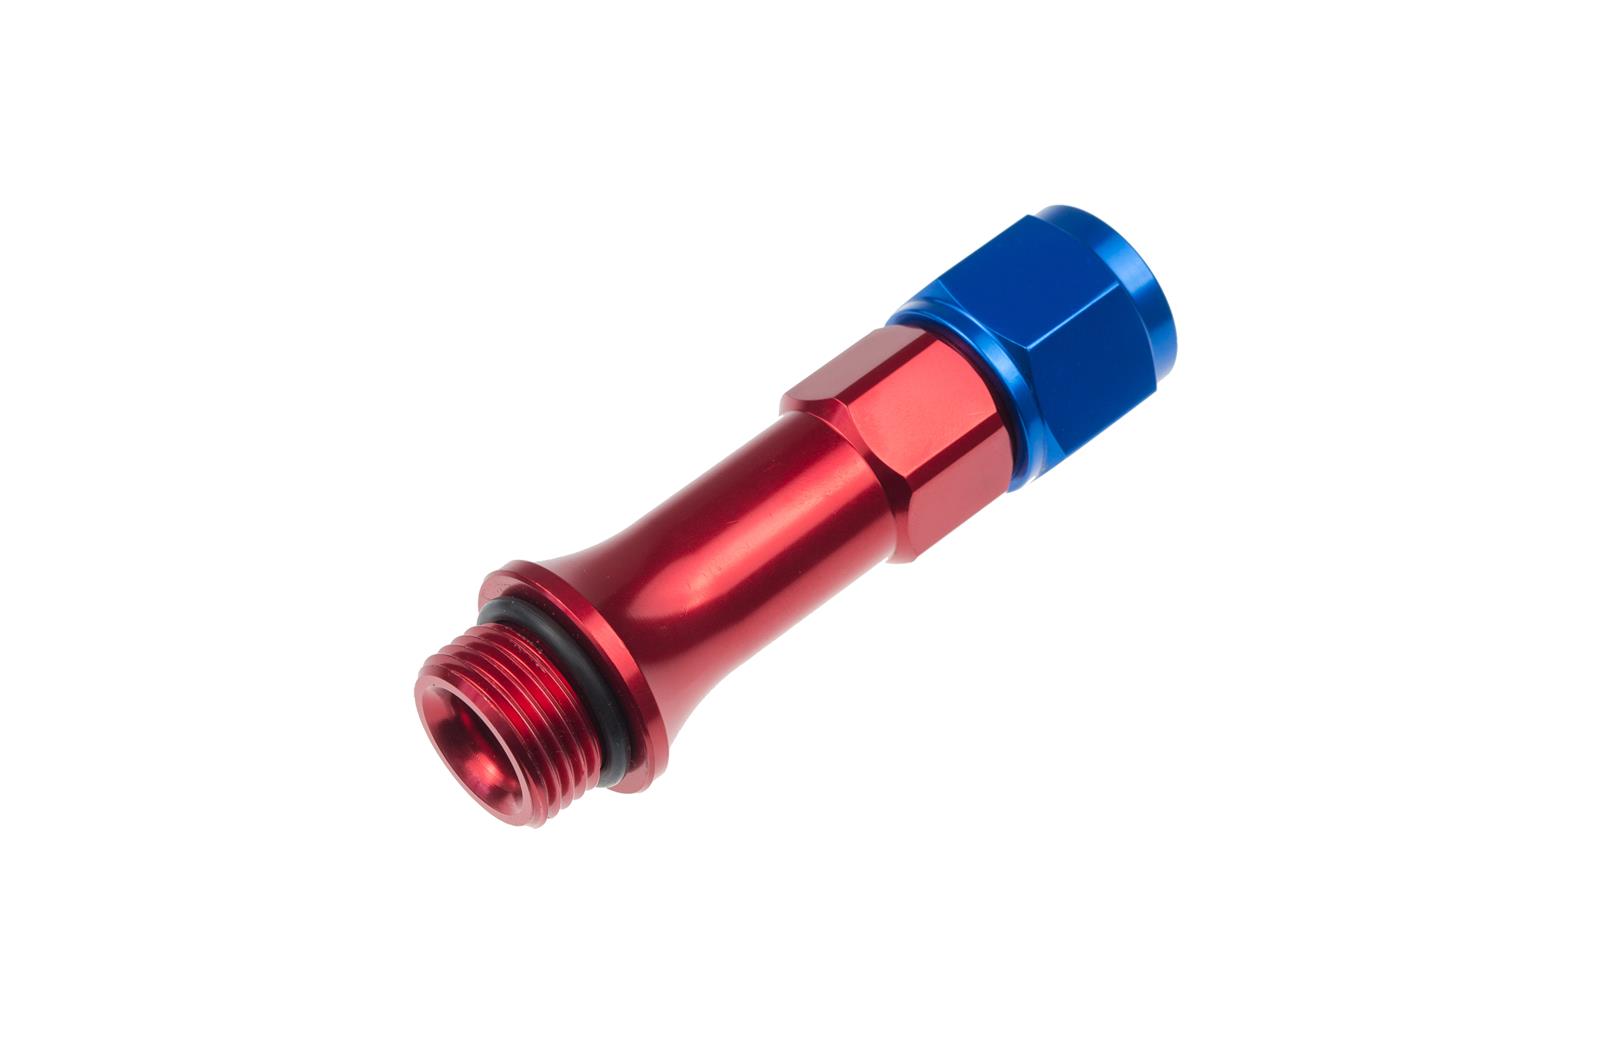 Redhorse Performance 5190-08-1 -08 X Holley Ultra XP Carburetor Inlet Fittings - red/blue - 2/pkg